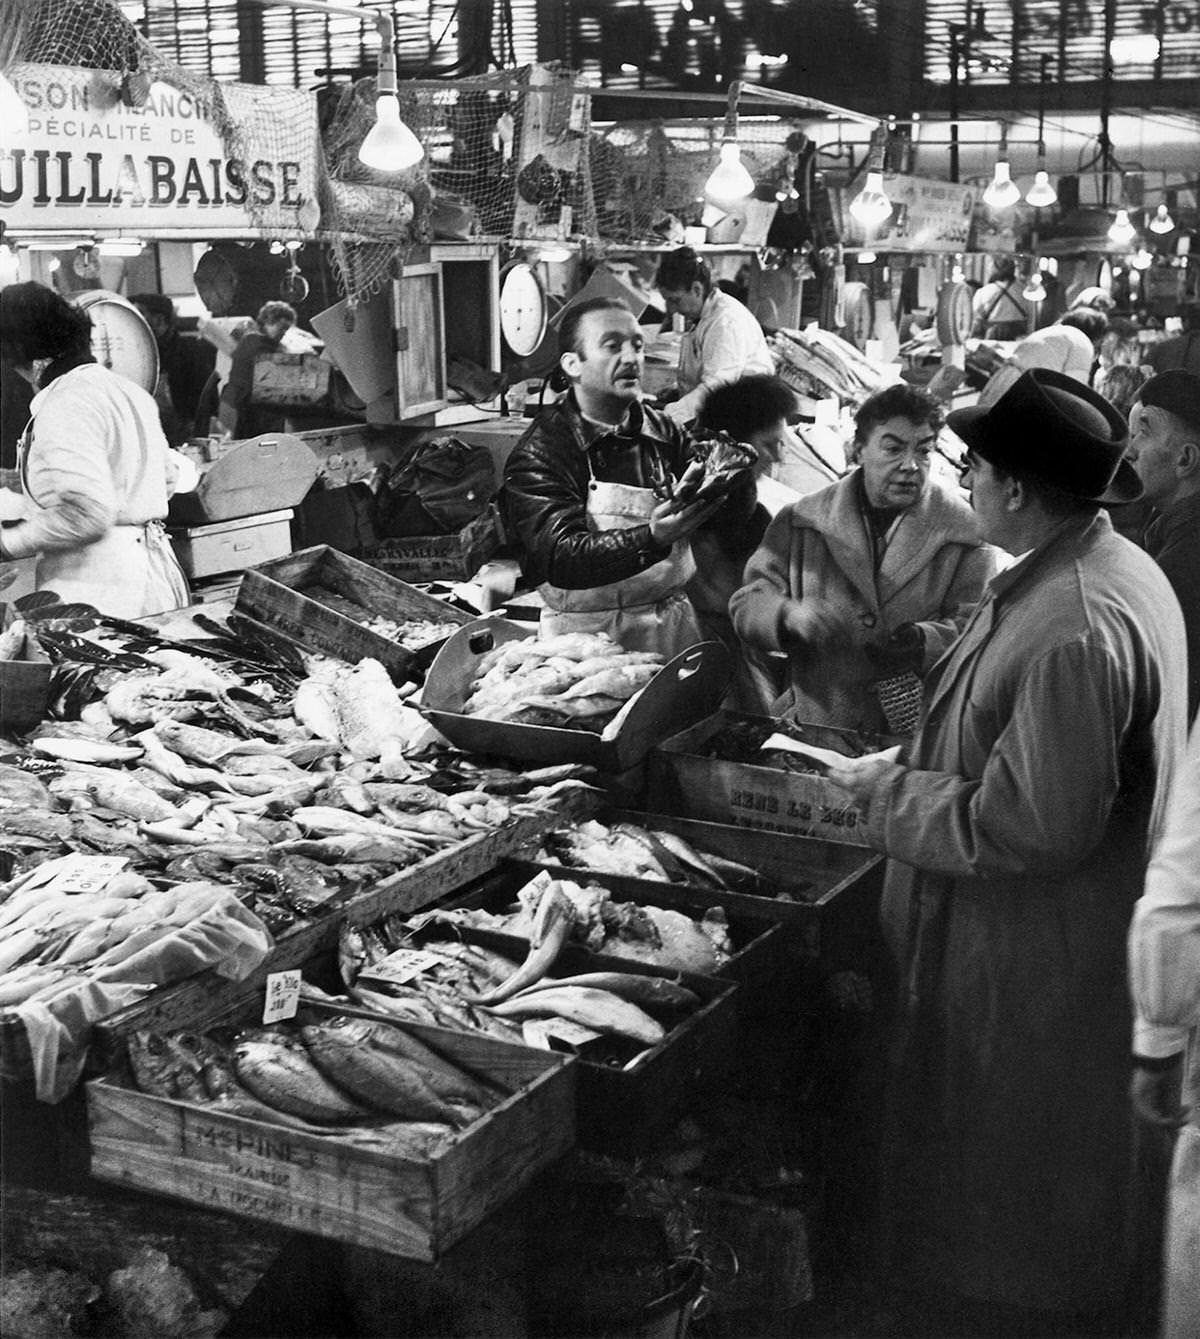 A restaurant owner choosing his products in Les Halles, which was historically the traditional central market of Paris, 1959